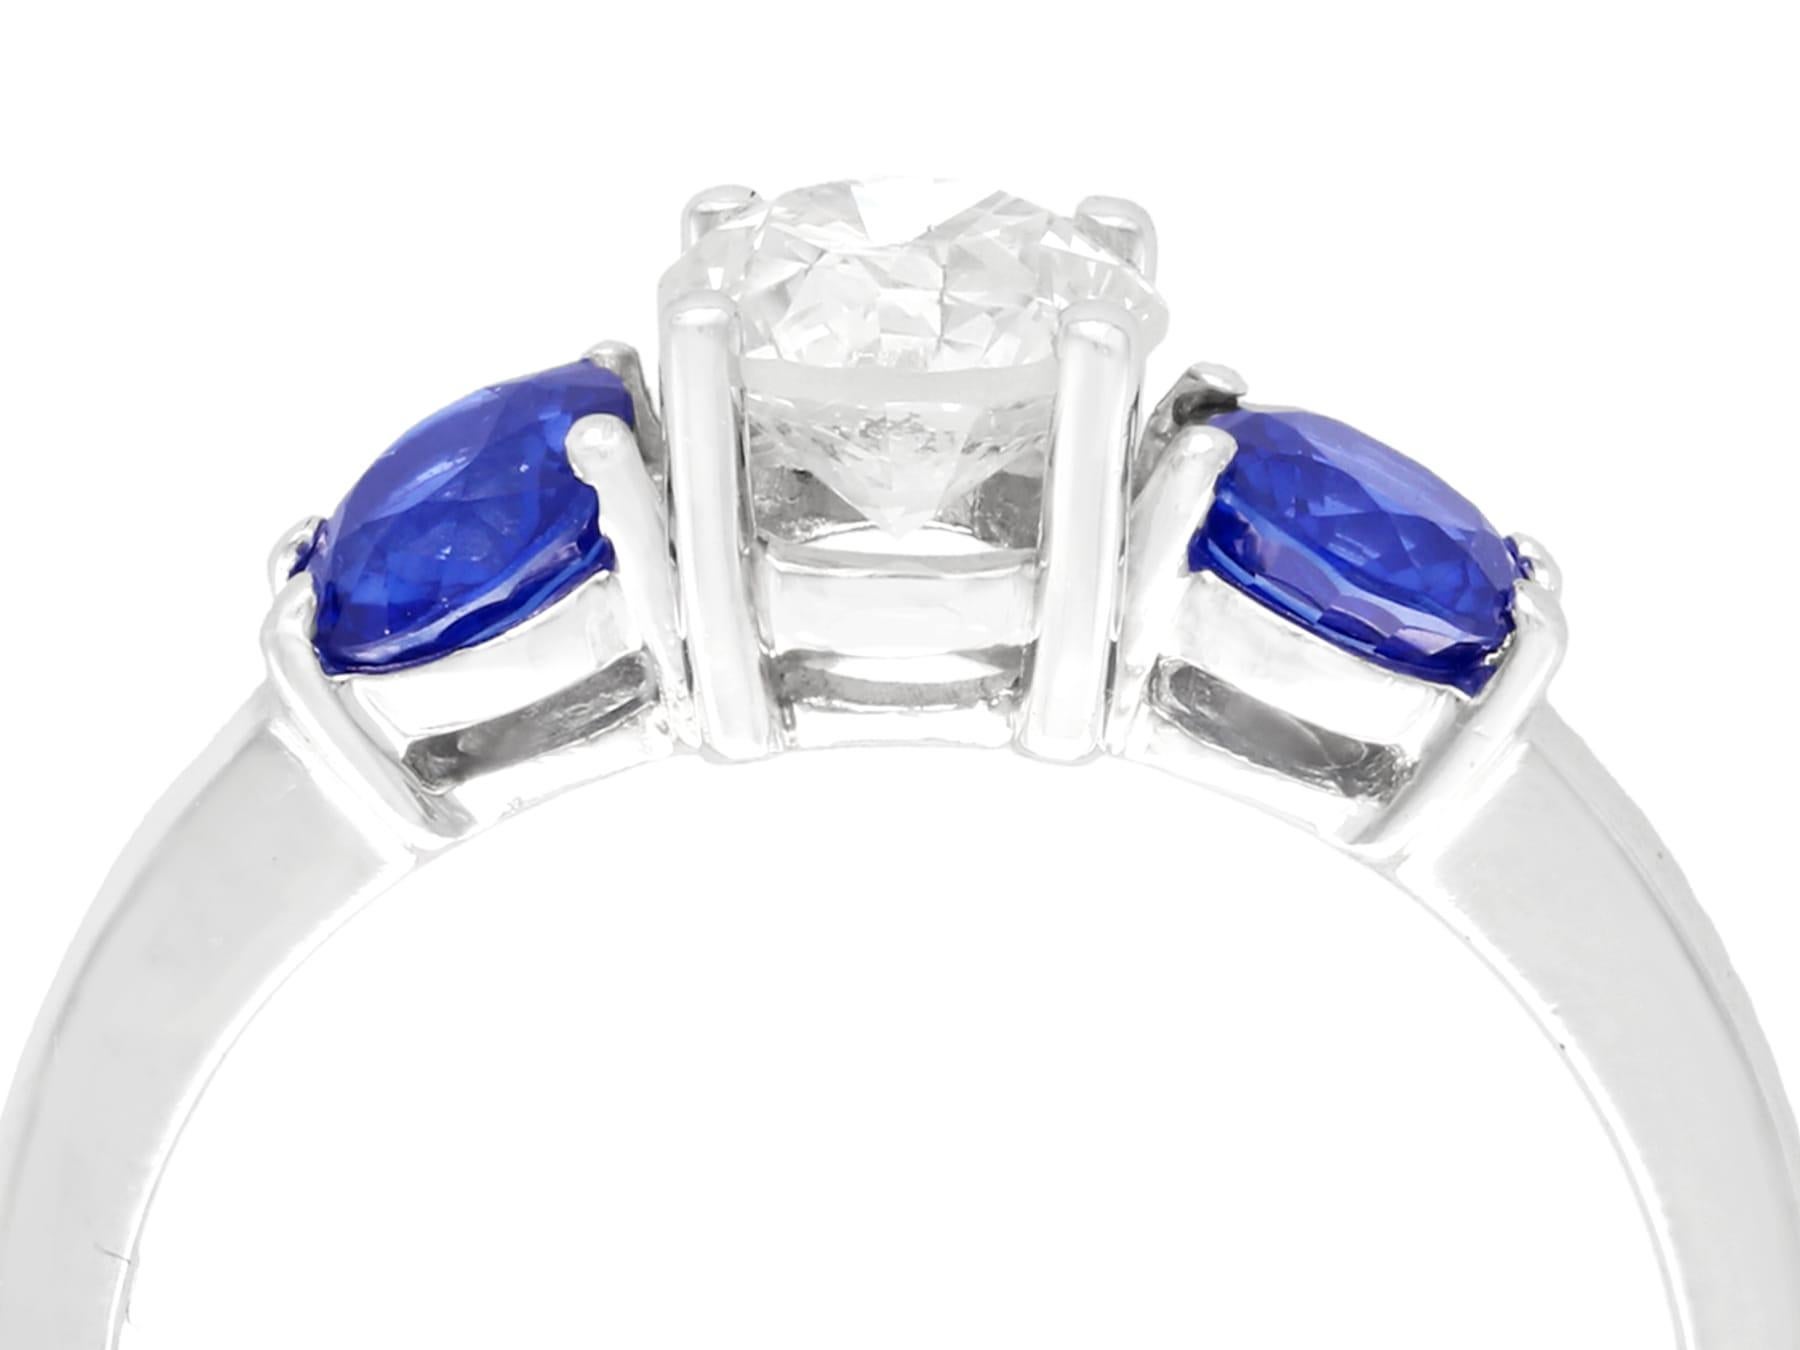 An impressive vintage 1.02 carat diamond and 0.85 carat sapphire, platinum trilogy ring; part of our diverse vintage jewelry and estate jewelry collections.

This fine and impressive vintage trilogy ring has been crafted in platinum.

The pierced